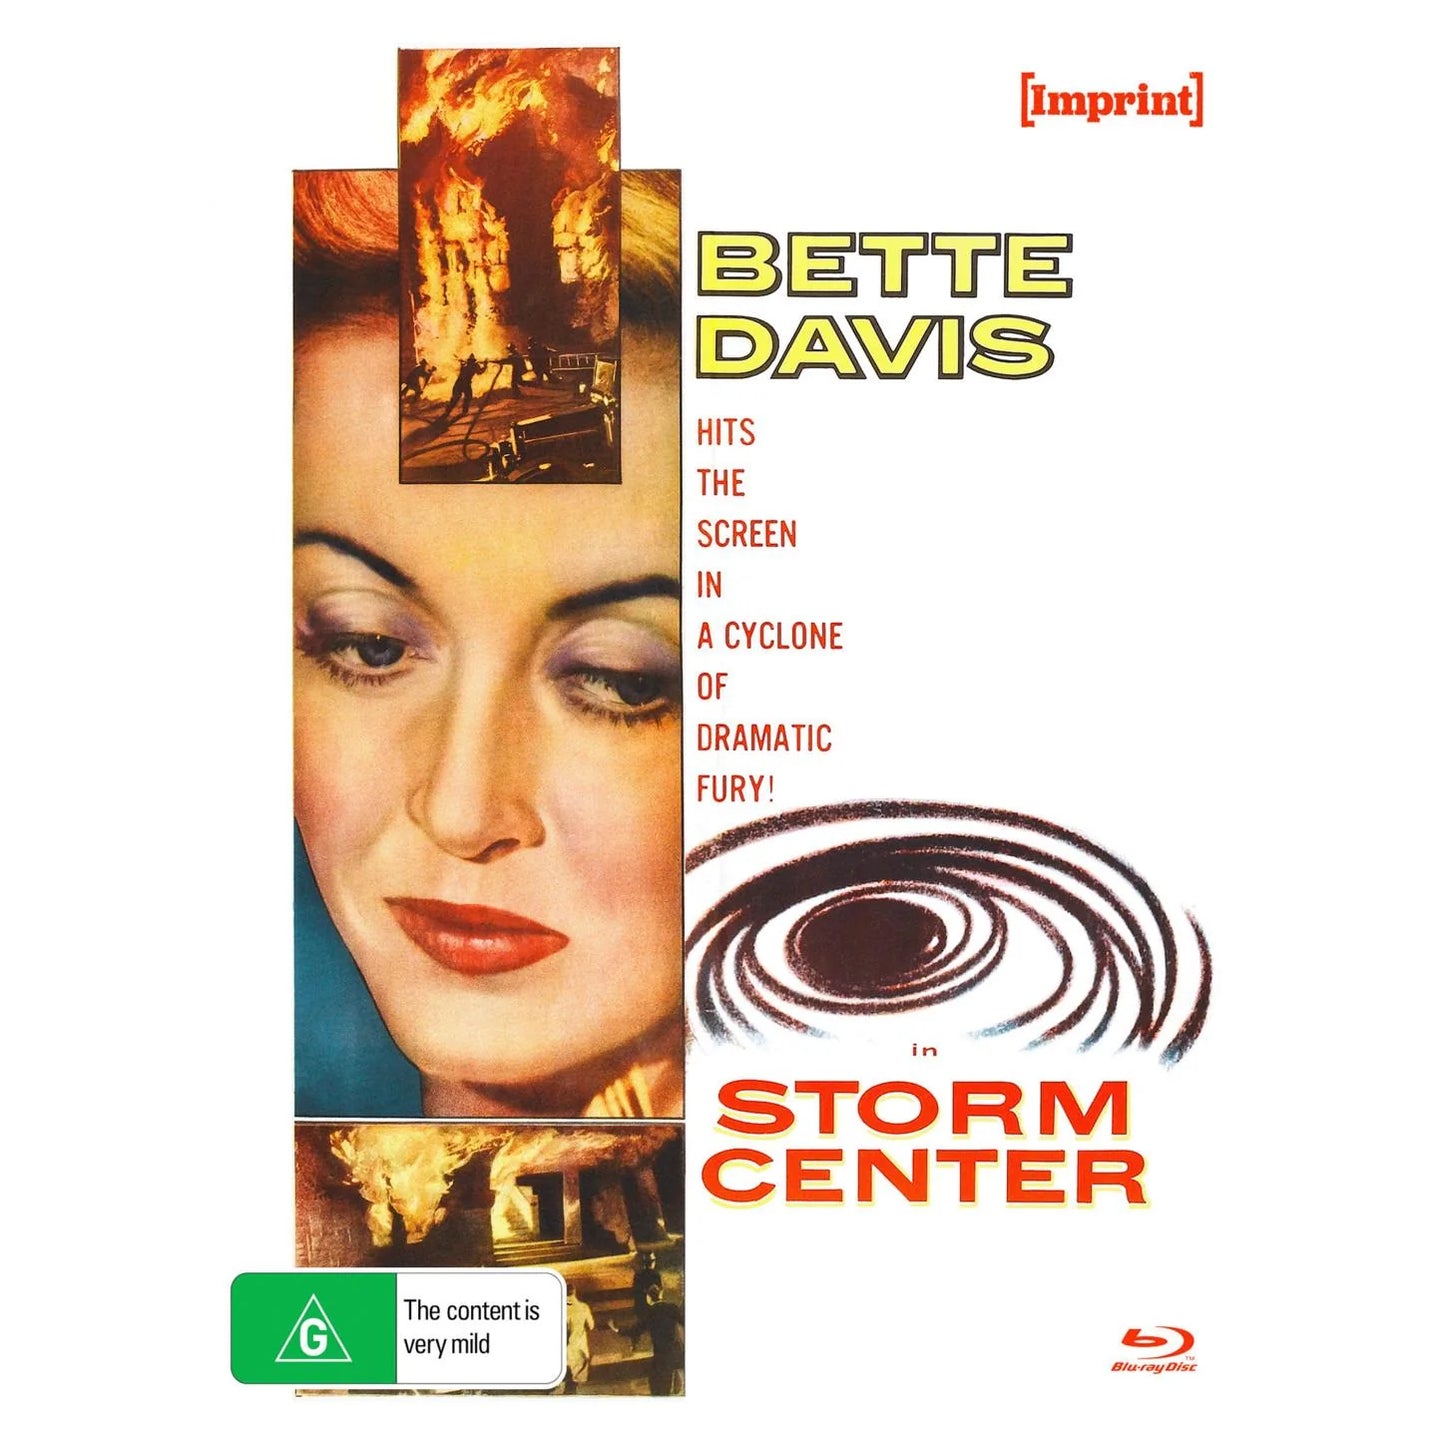 Storm Center (Imprint #155 Special Edition) Blu-Ray